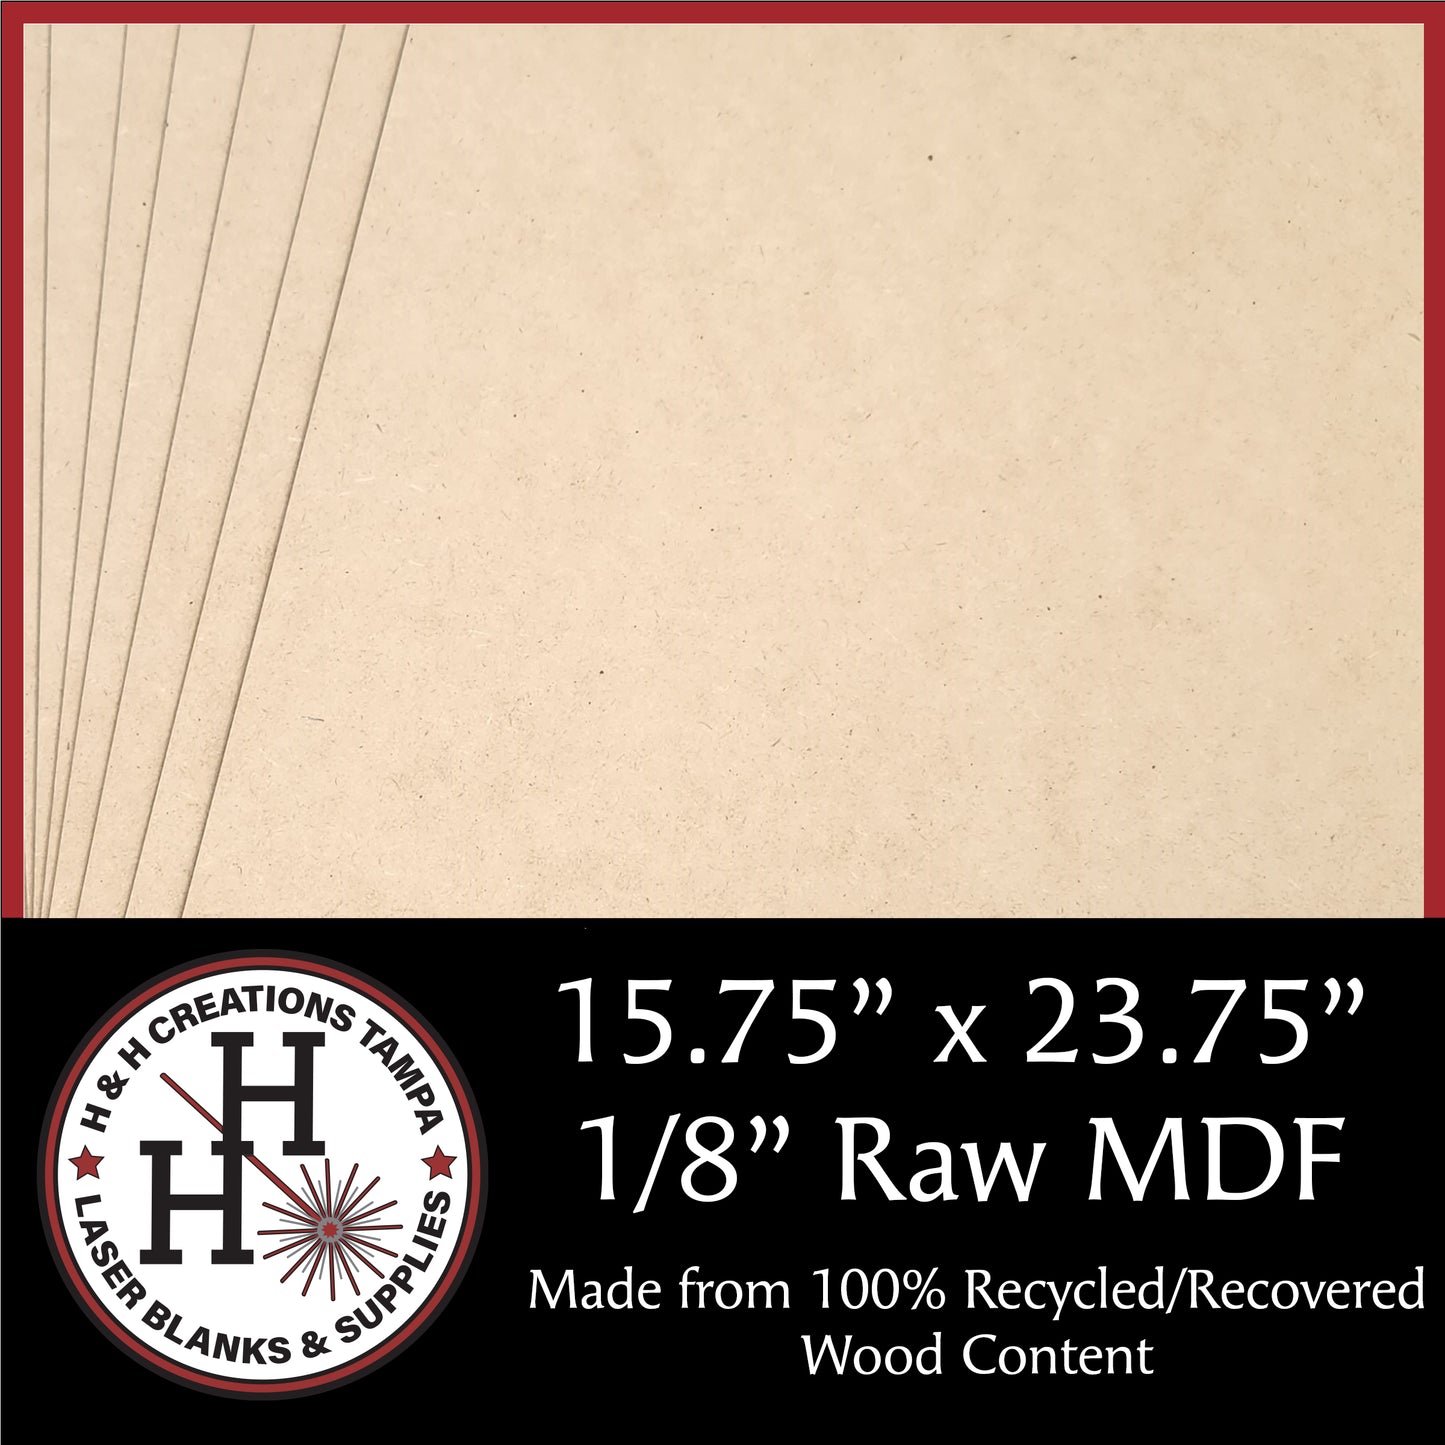 LOCAL PICK UP ONLY - 1/8" Raw Premium MDF Draft Board - Without Slick Finish – 15.75" x 23.75"